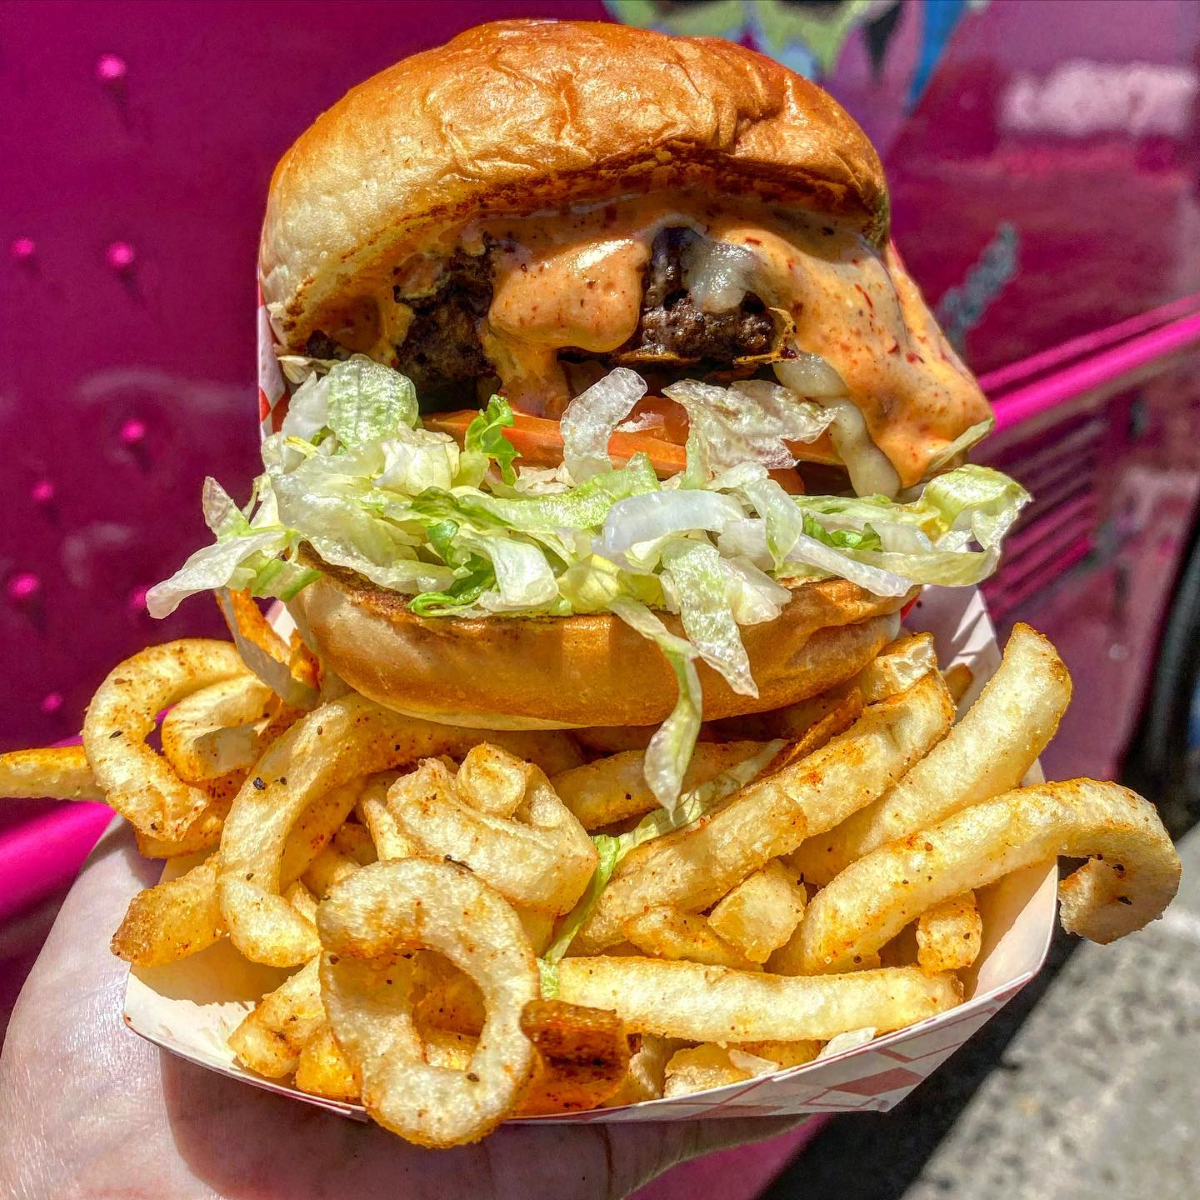 It Appears Baby’s Badass Burgers is Coming to Lake Forest’s Local Kitchens